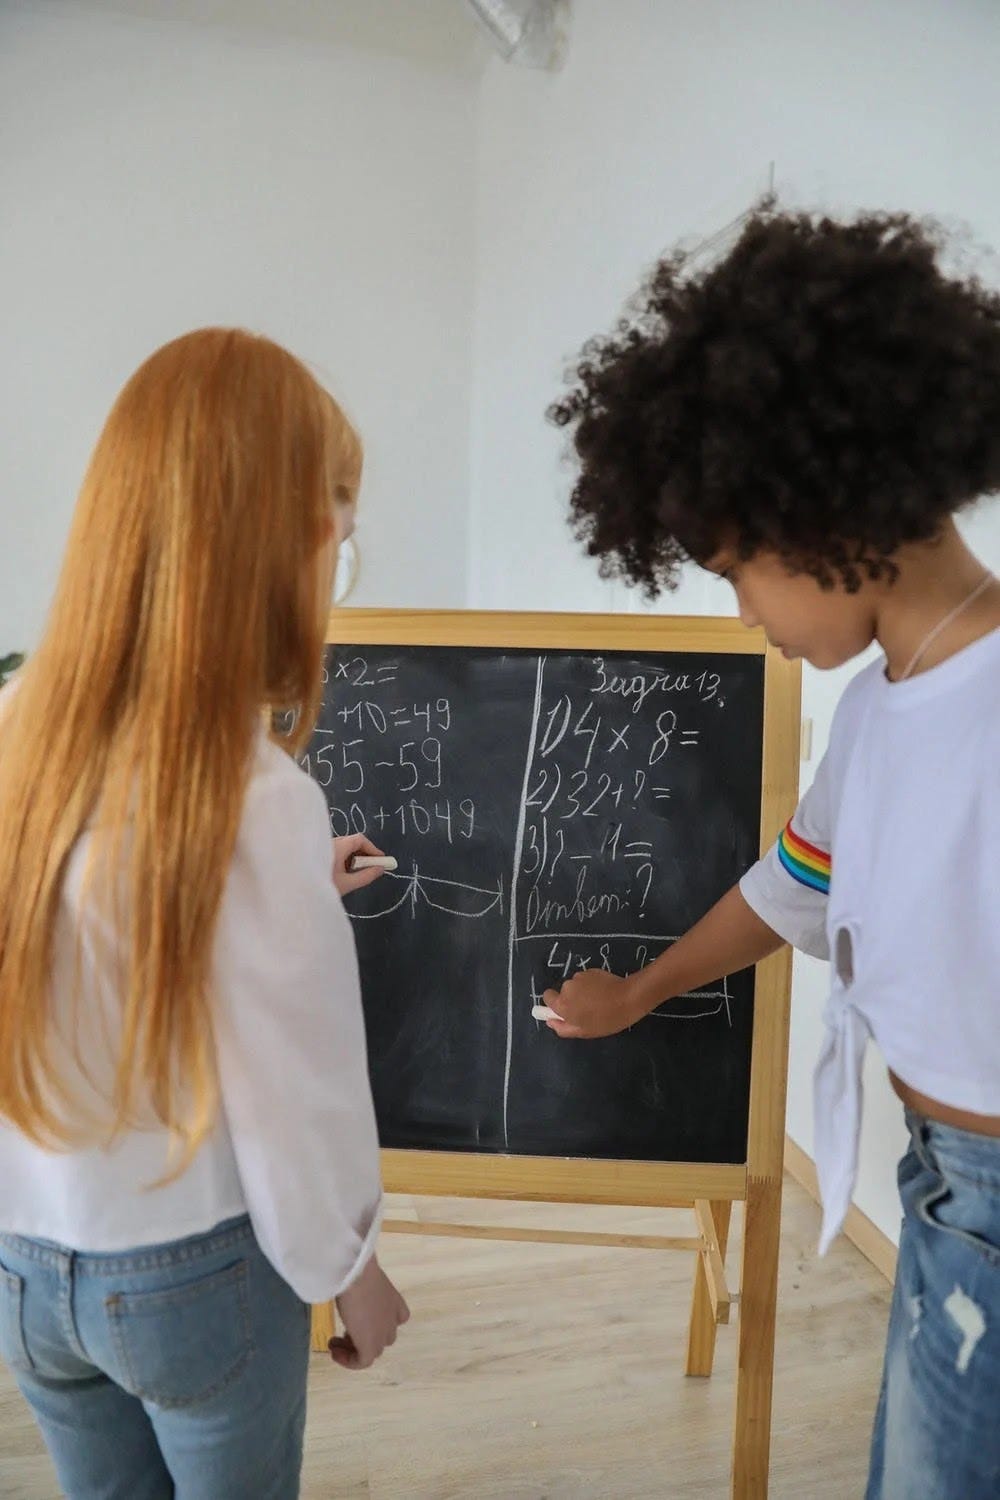 A boy and a girl writing on a black board